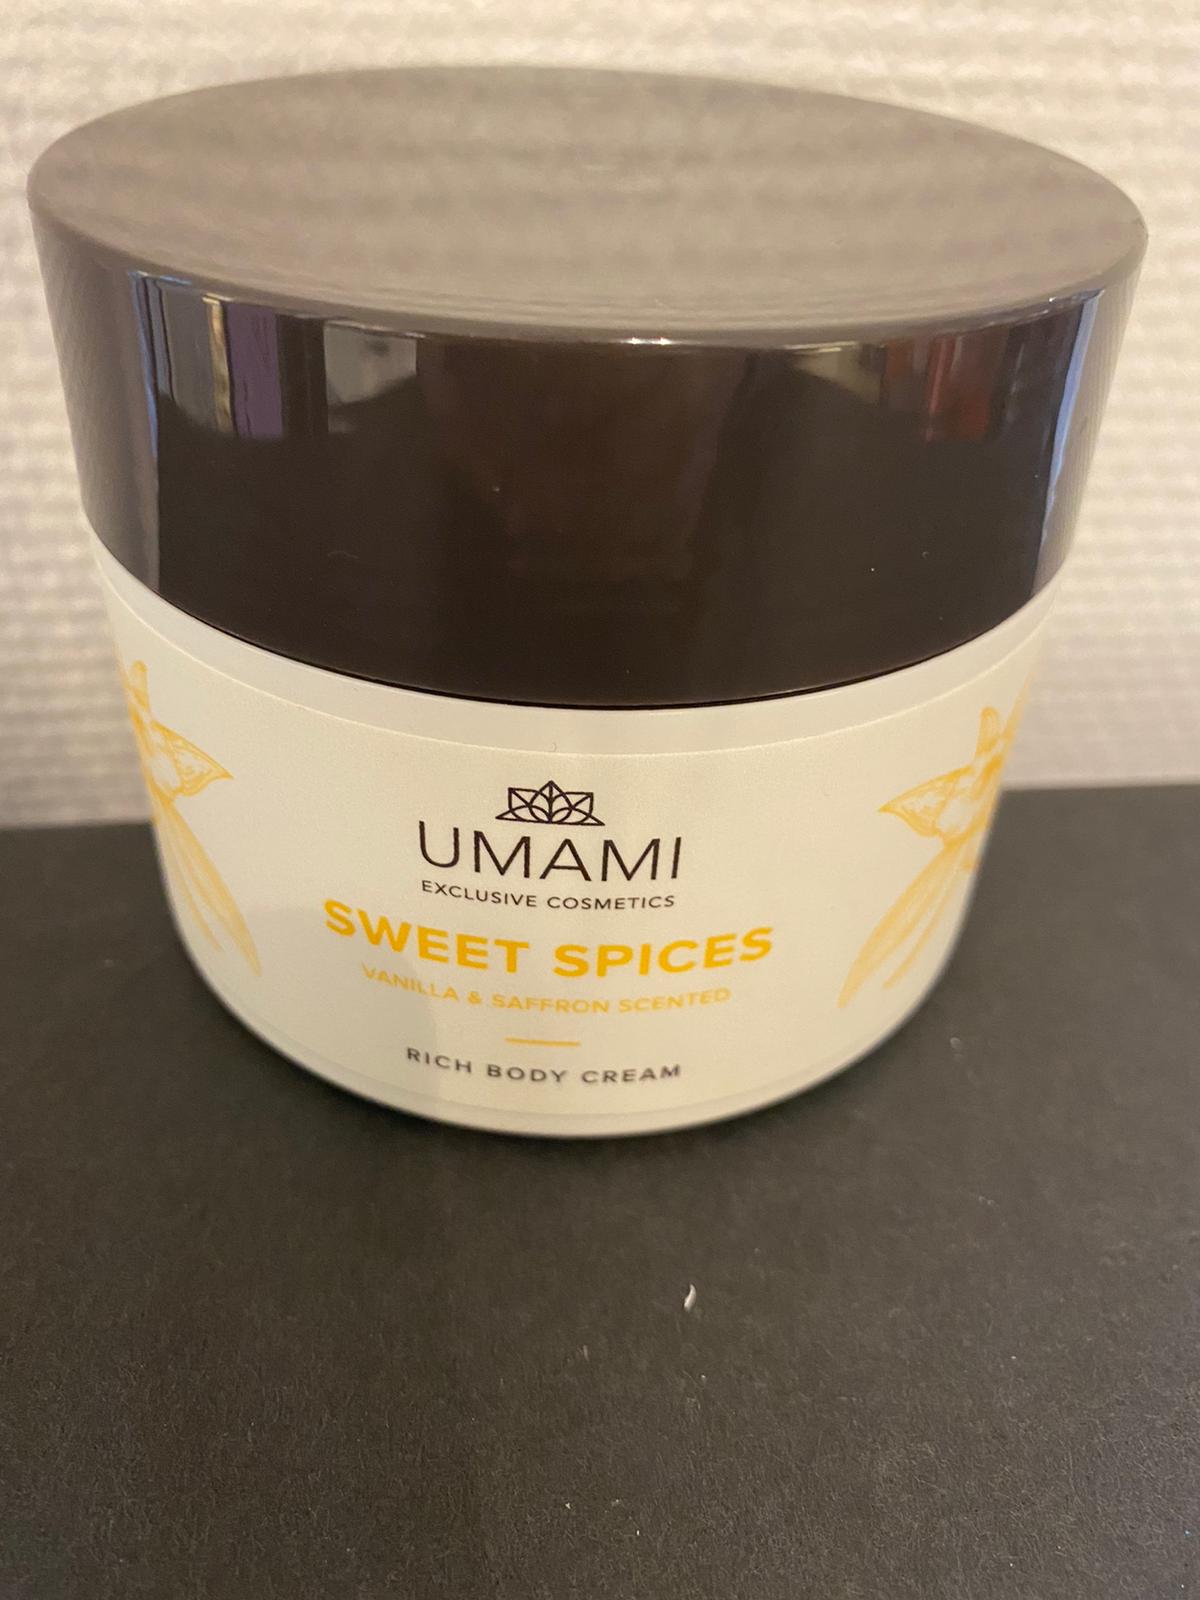 Umami sweet spices rich body creme